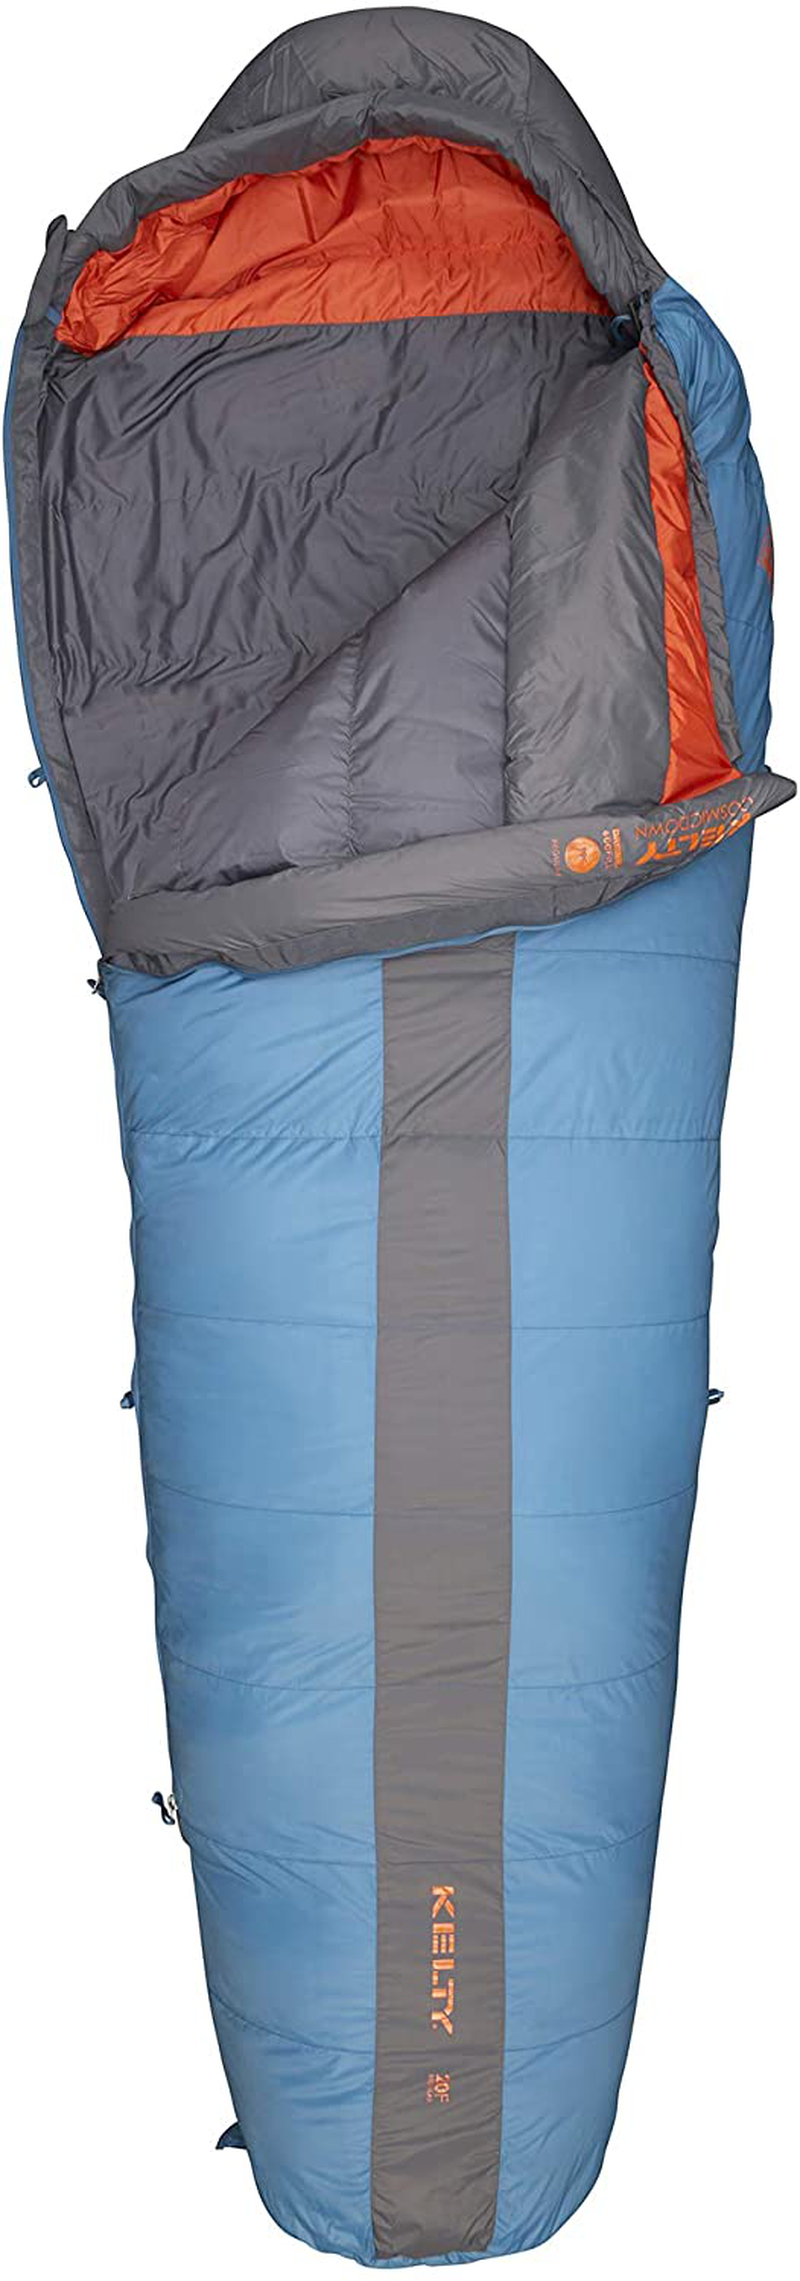 Kelty Cosmic 20 Degree down Sleeping Bag - Ultralight Backpacking Camping Sleeping Bag with Stuff Sack Sporting Goods > Outdoor Recreation > Camping & Hiking > Sleeping BagsSporting Goods > Outdoor Recreation > Camping & Hiking > Sleeping Bags Kelty   